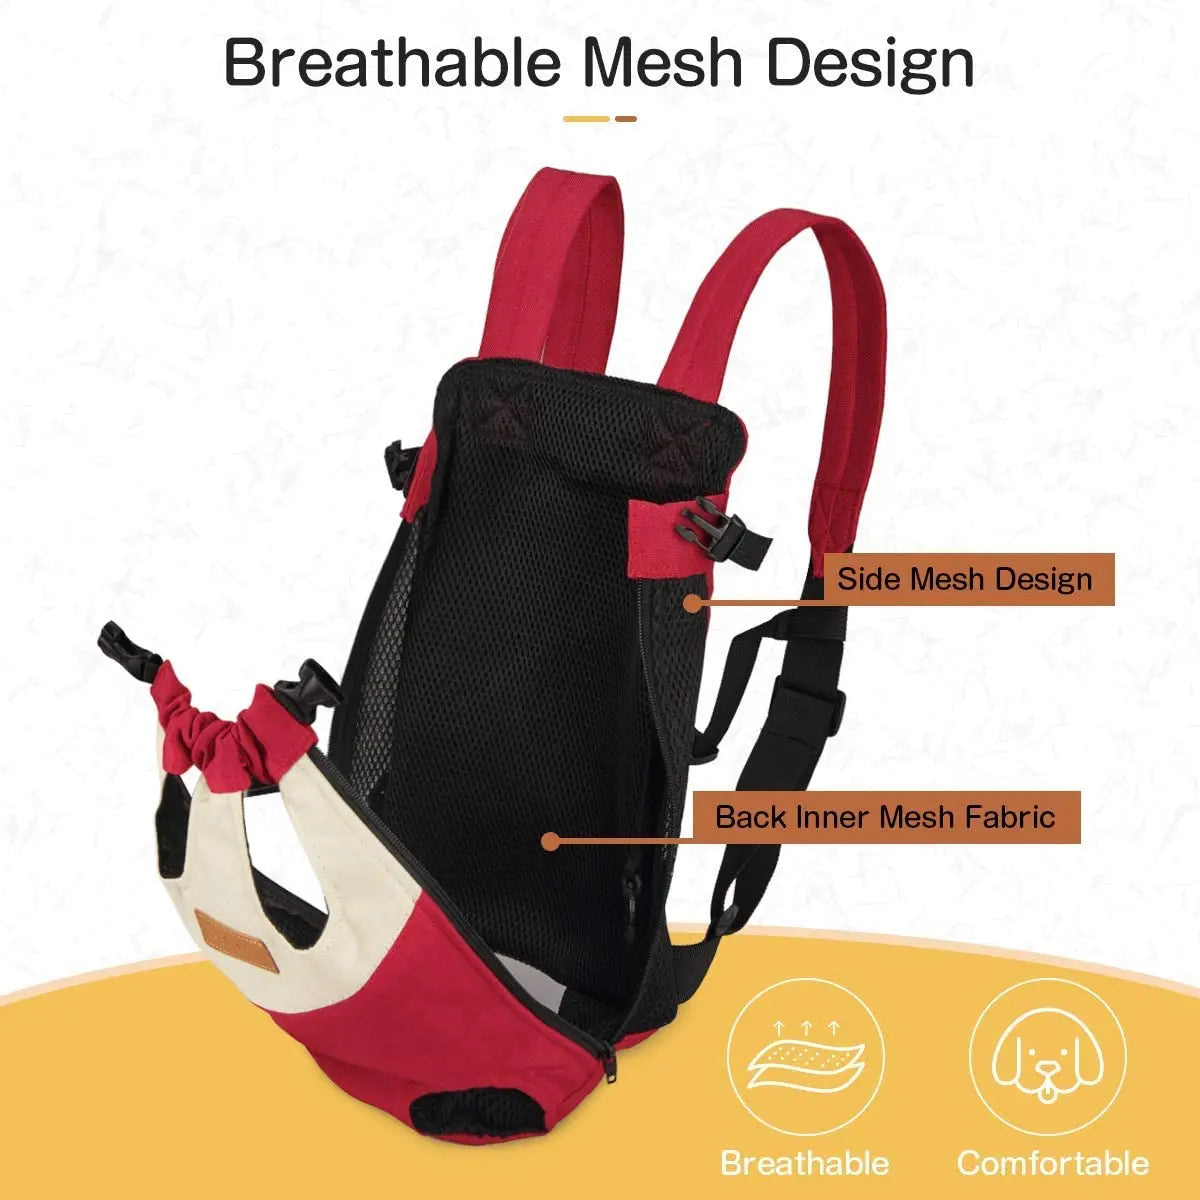 Mesh Pet Dog Carrier Backpack: Fashionable Outdoor Travel Bag for Small Pets  ourlum.com   